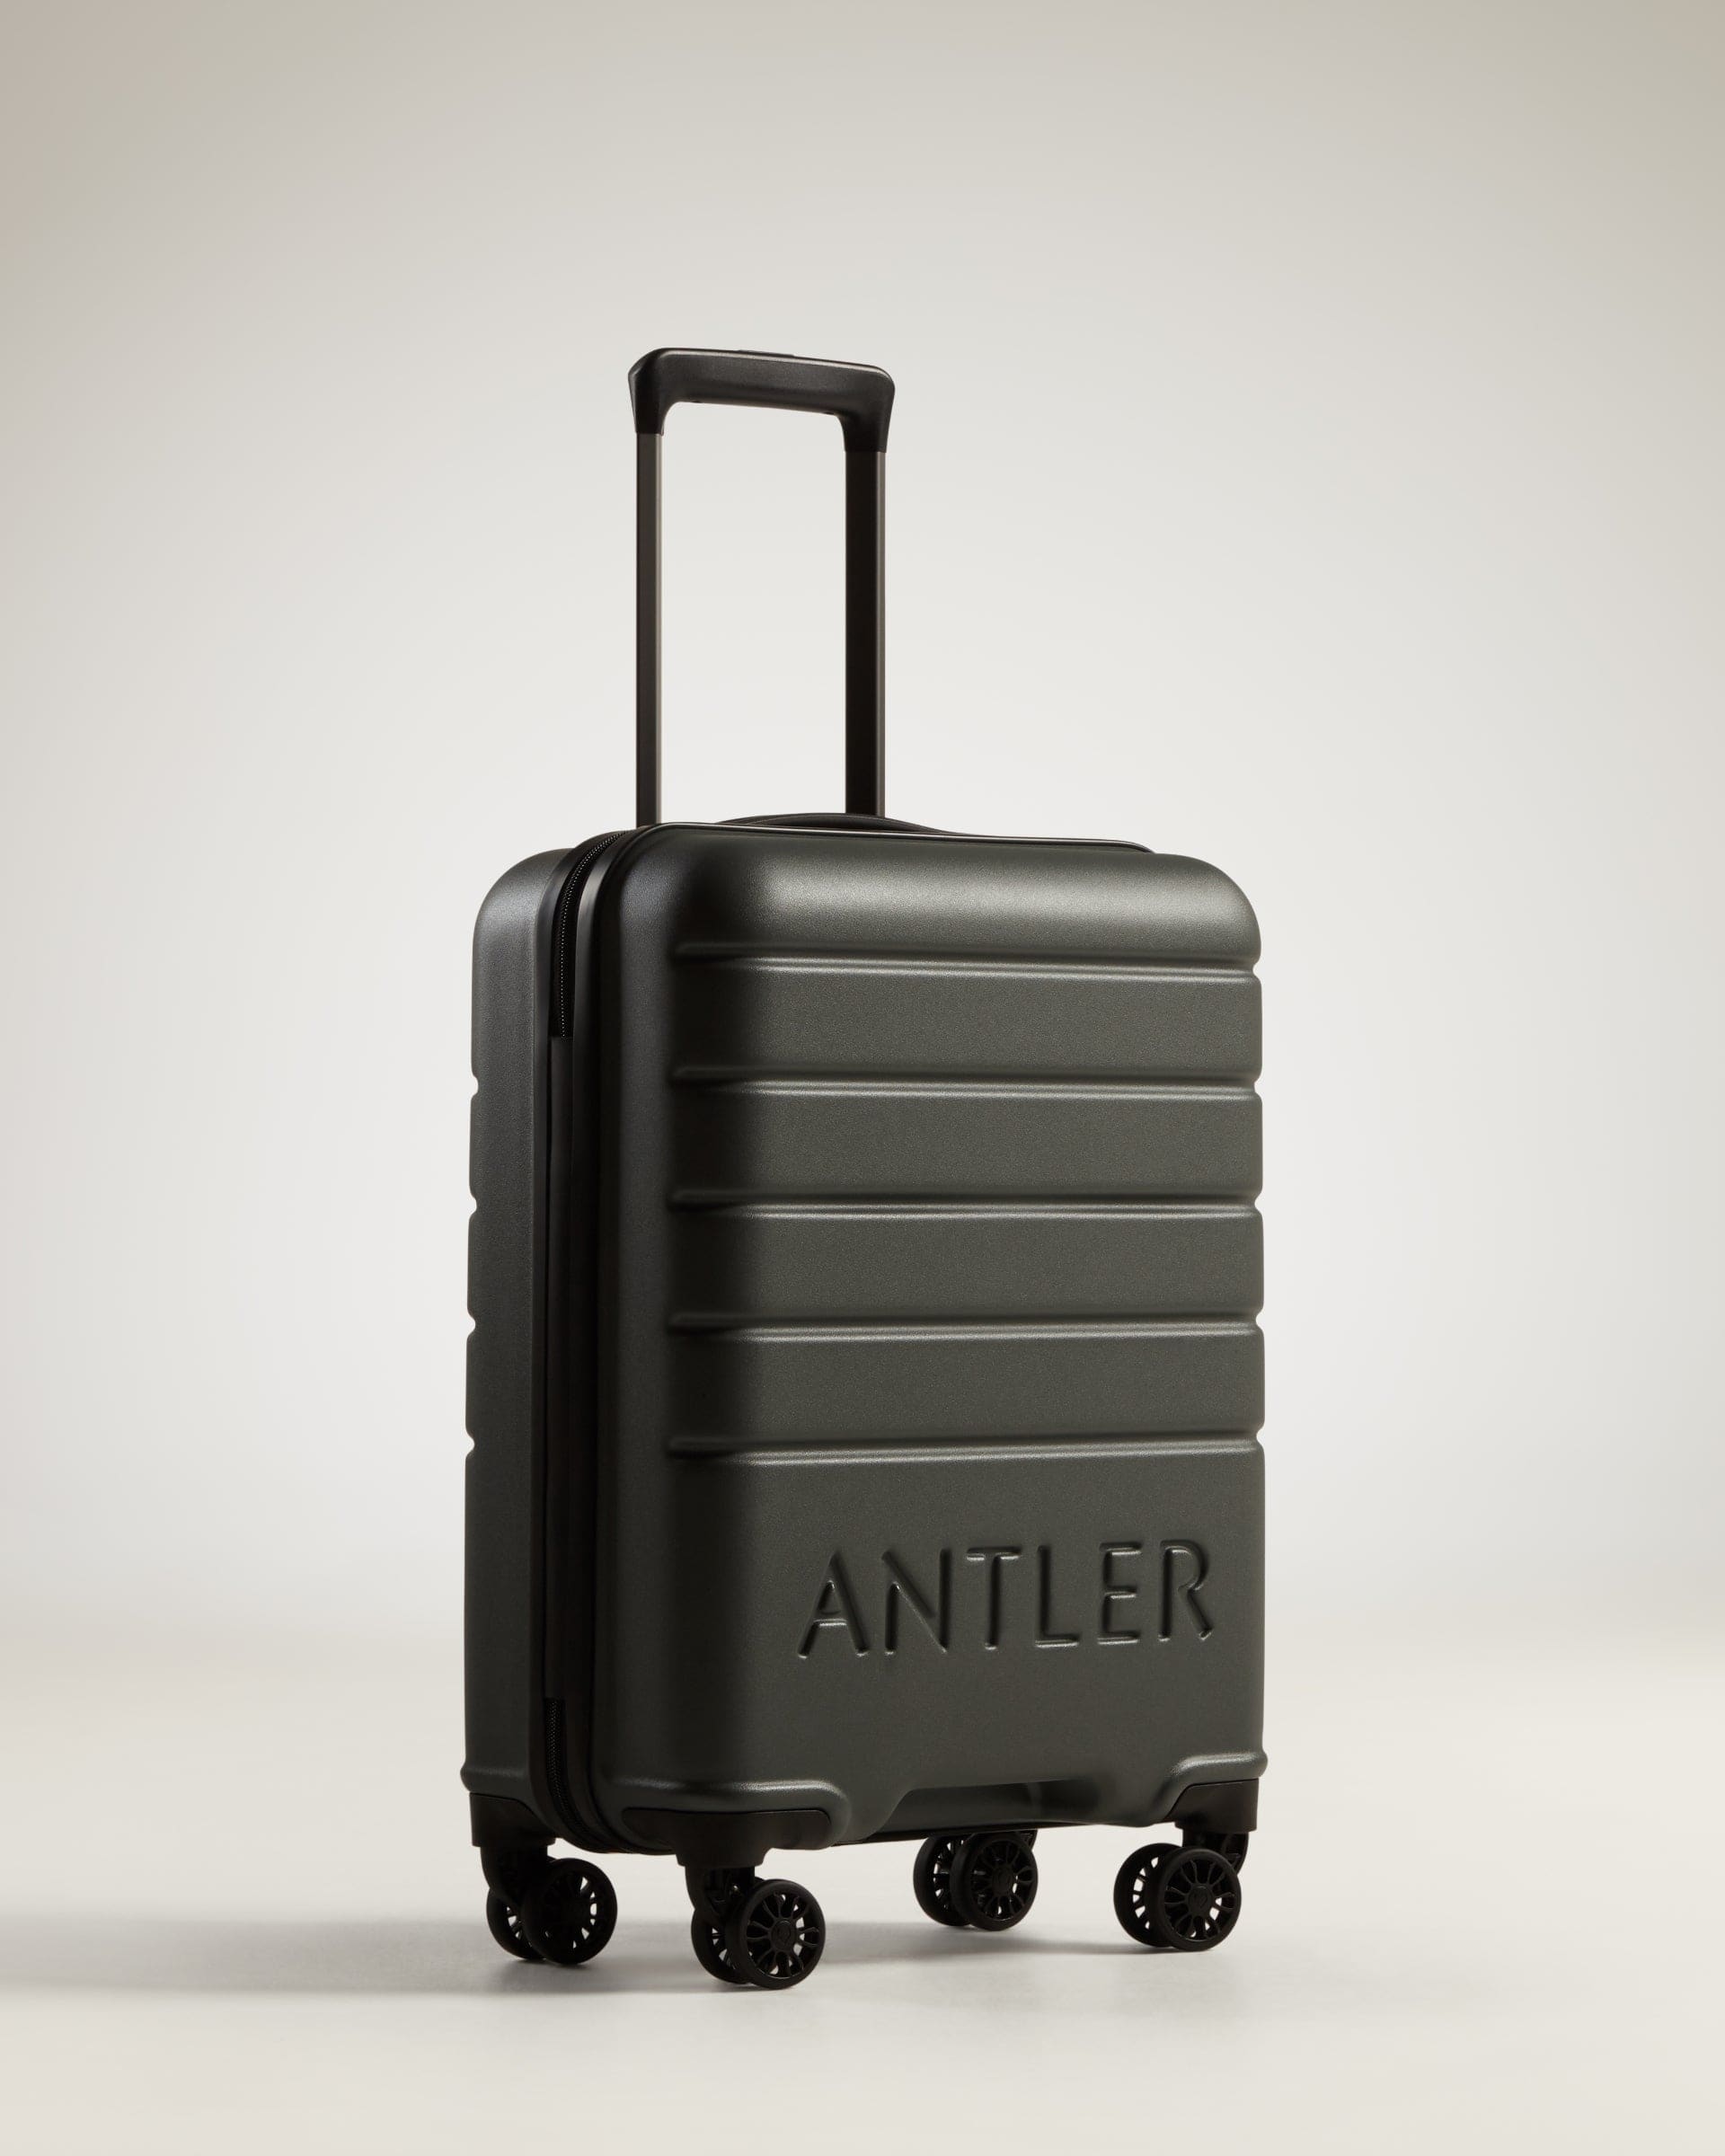 View Antler Logo Cabin Suitcase In Moss Grey Size 55 x 40 x 20 cm information